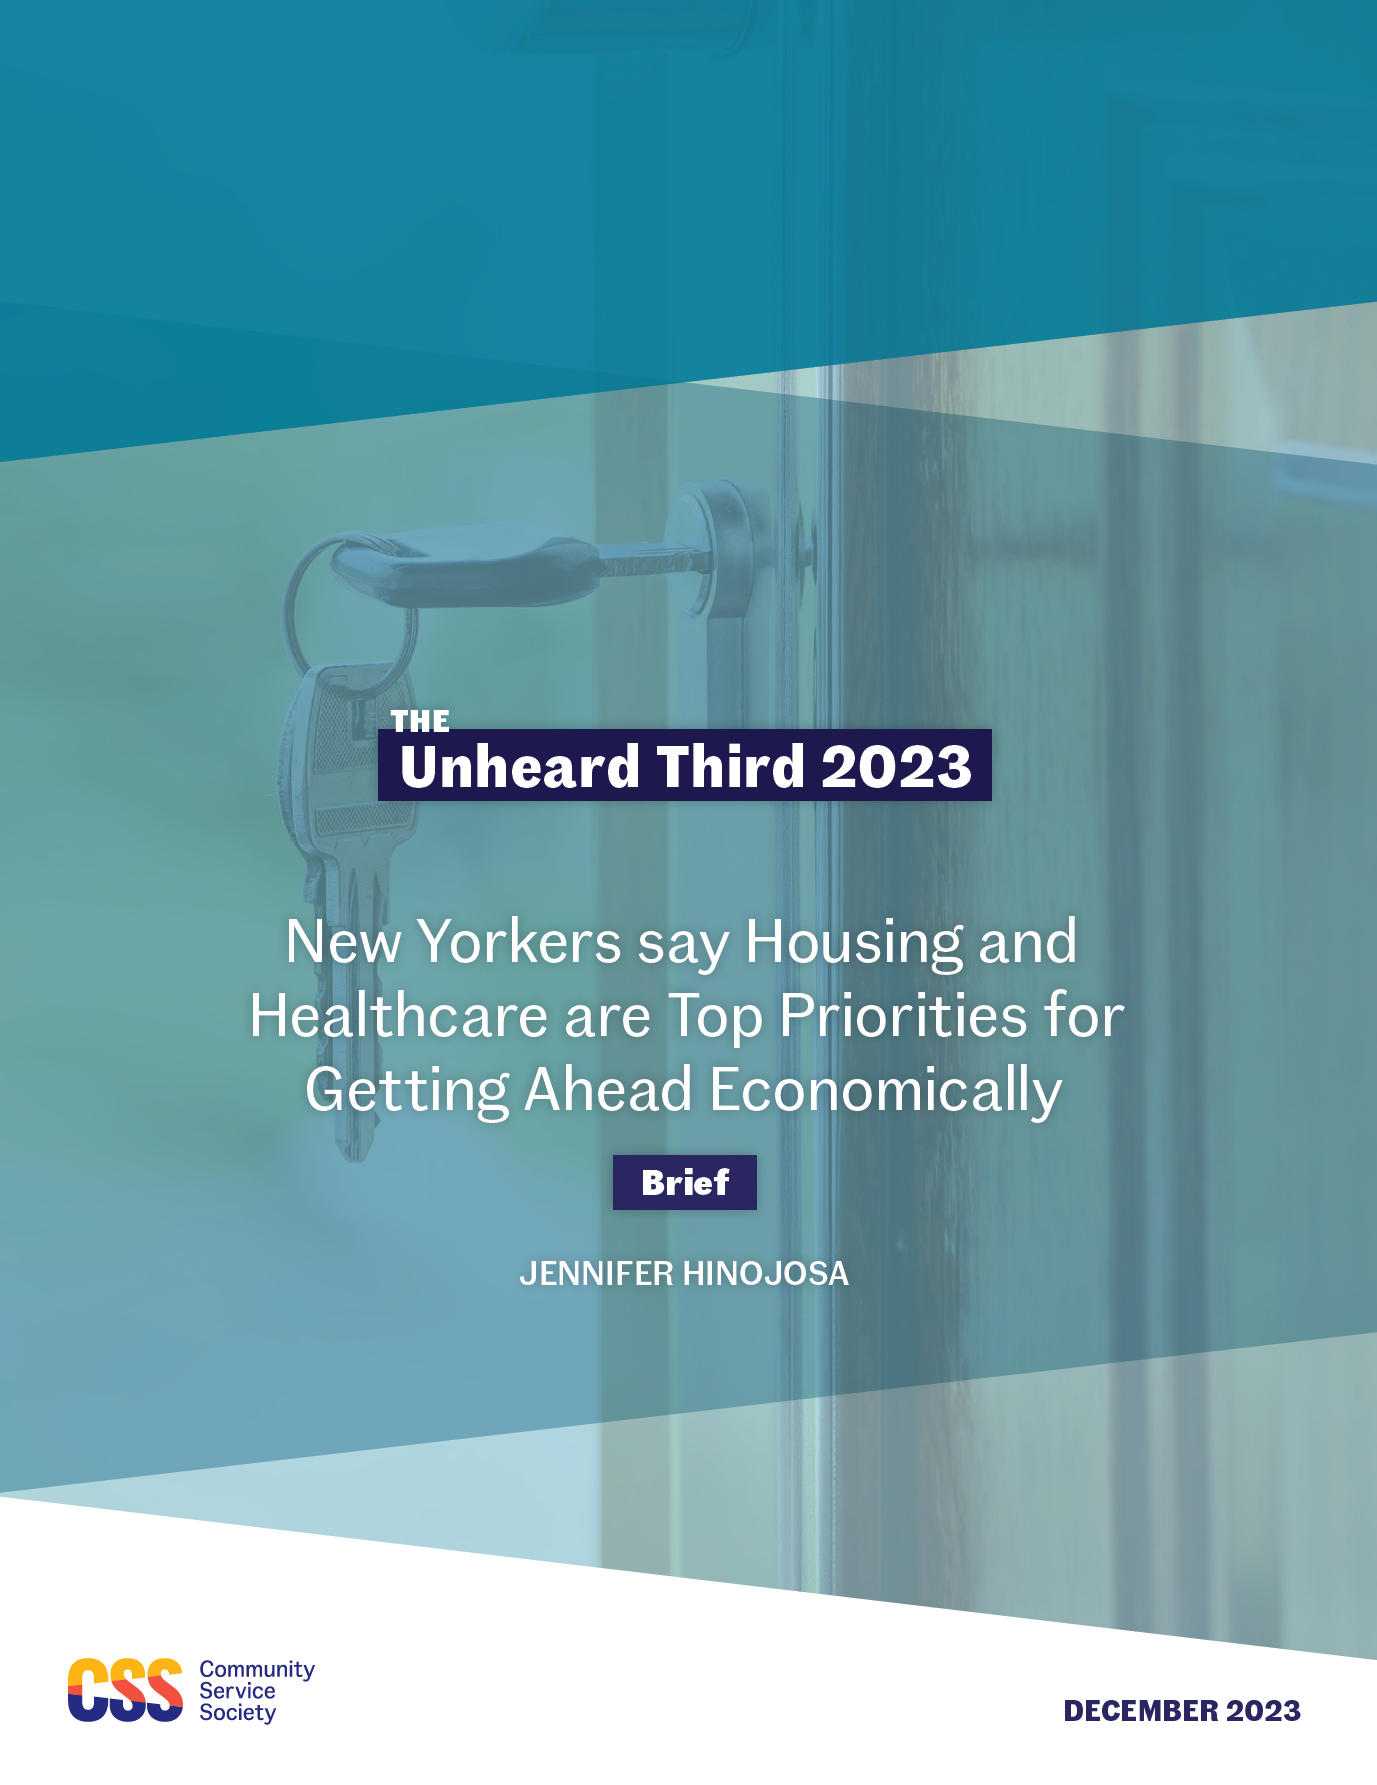 New Yorkers Say Housing and Healthcare Are Top Priorities For Getting Ahead Economically